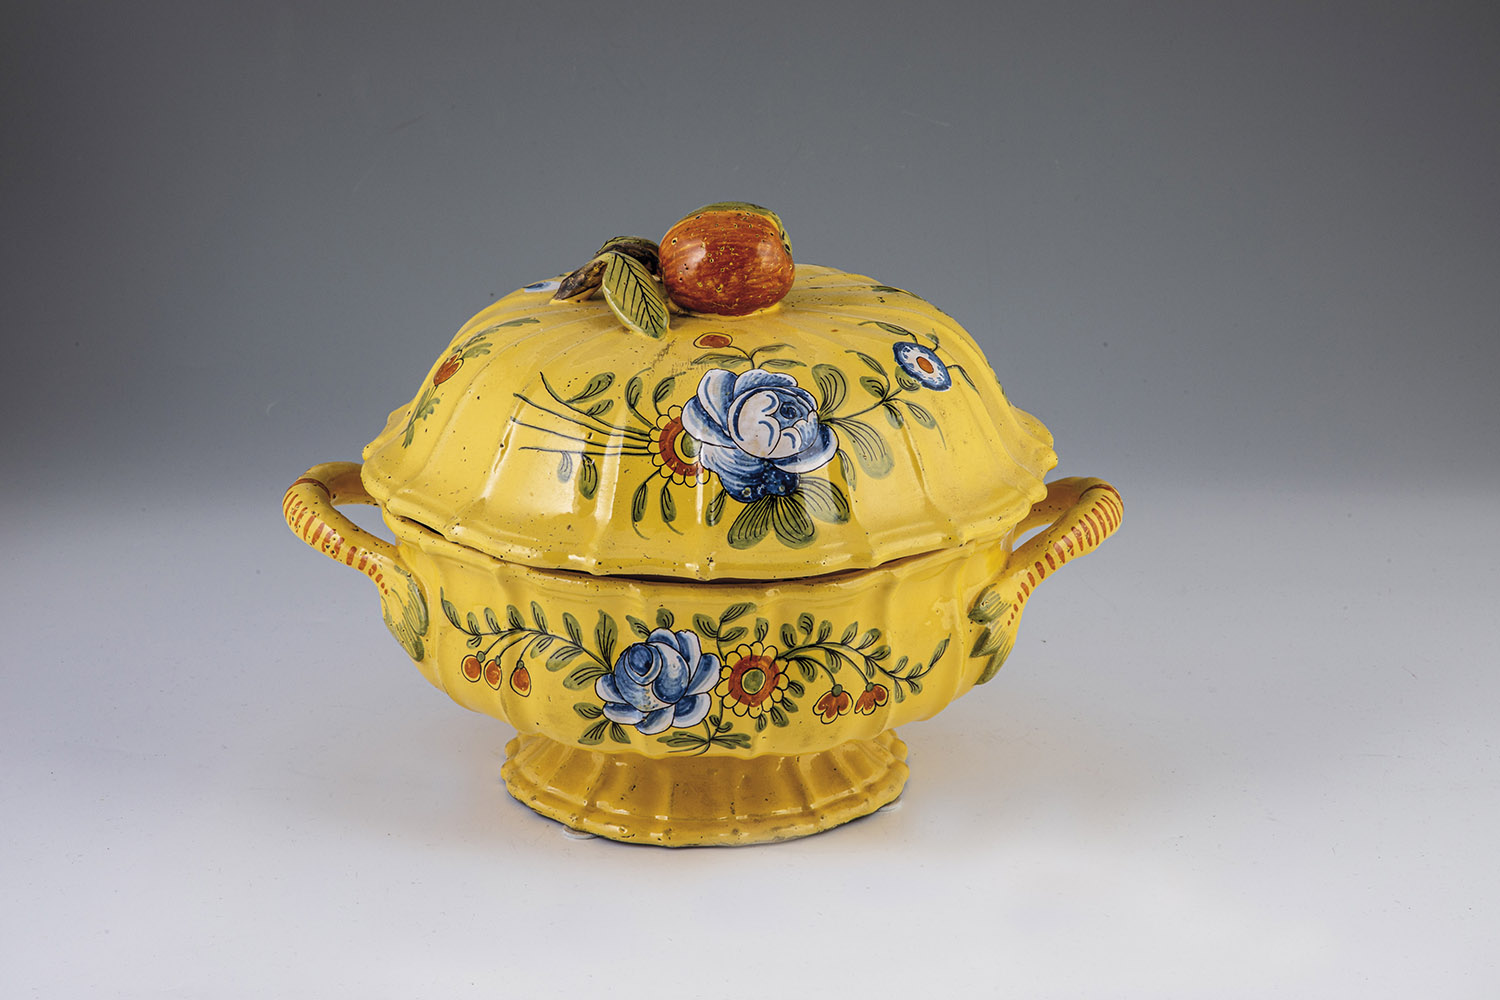 Lidded tureen with floral decor